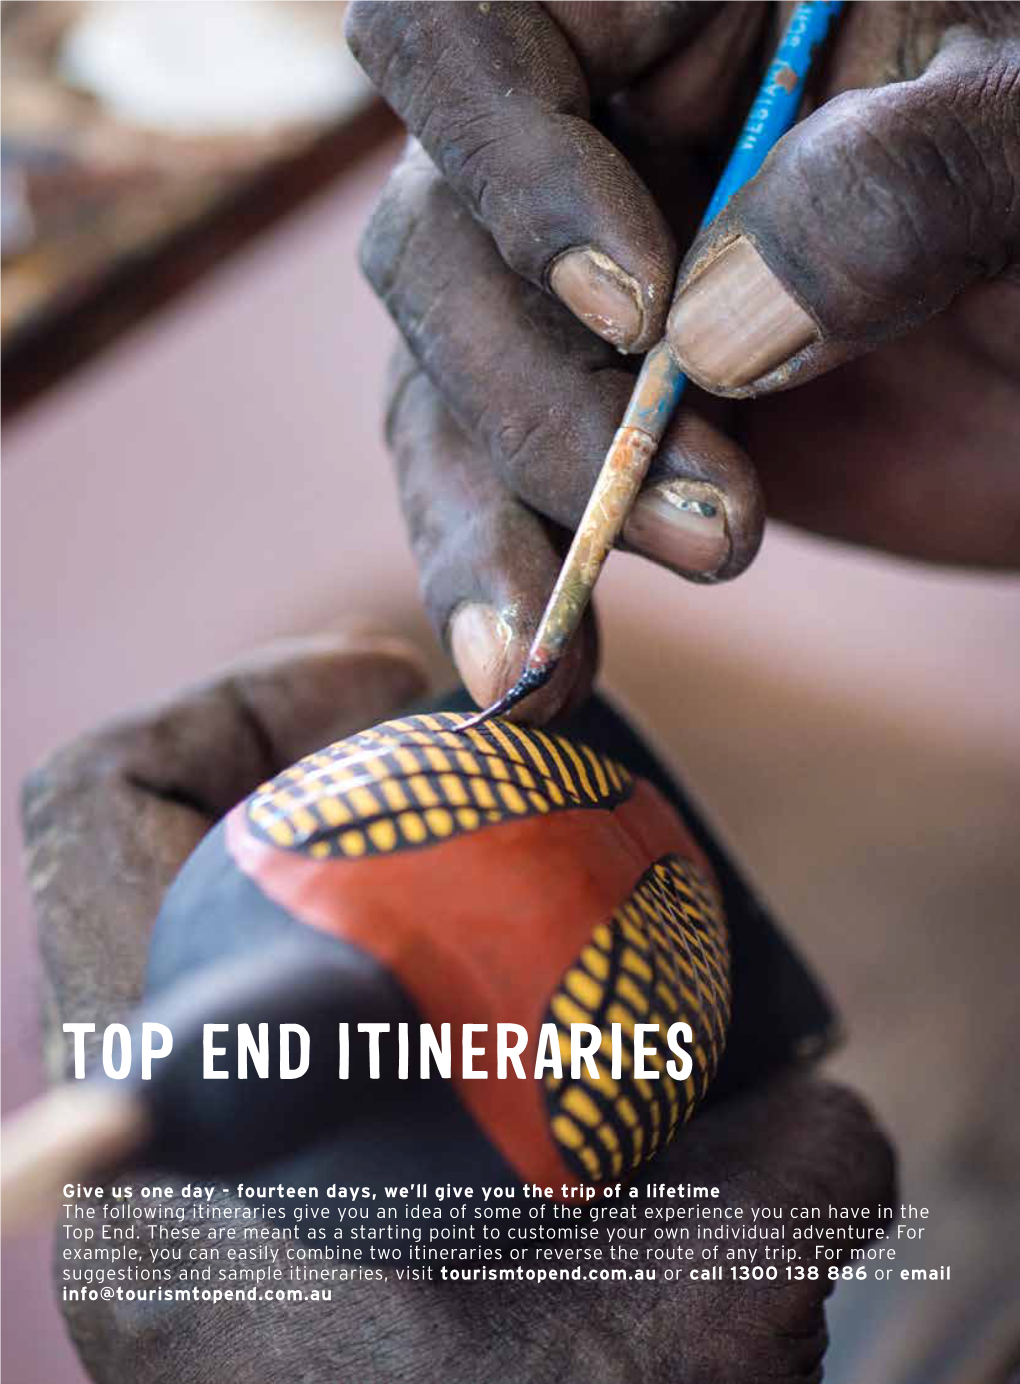 Top End Itineraries